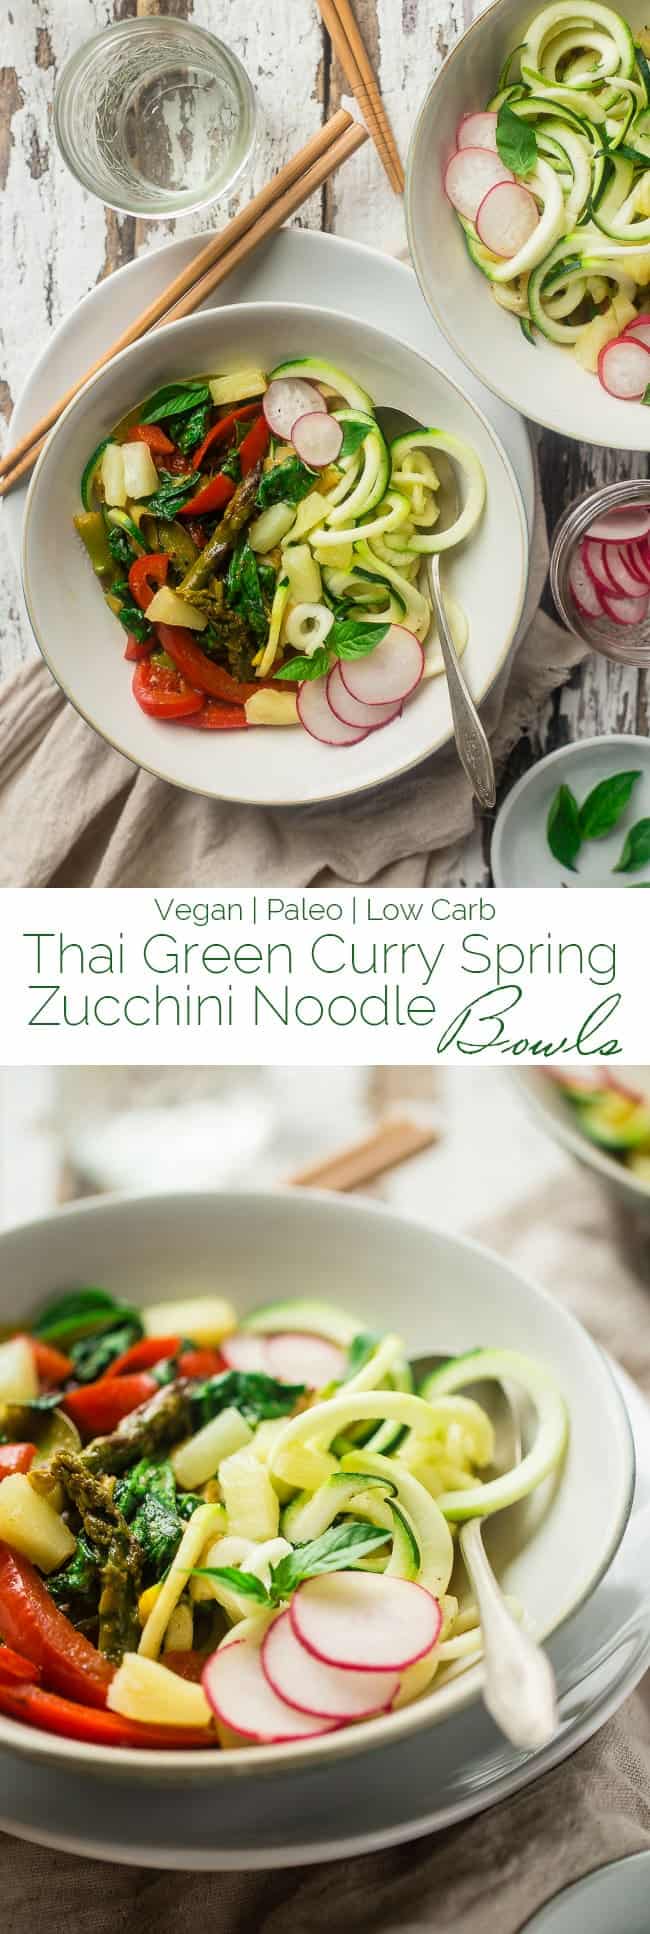 Vegan and Paleo Green Coconut Curry Spring Veggie Bowls with Zucchini Noodles - These easy bowls are made with pineapple, spring veggies, zucchini noodles and a creamy green coconut curry sauce! They're perfect for Meatless Monday and only 250 calories! | Foodfaithfitness.com | @FoodFaithFit